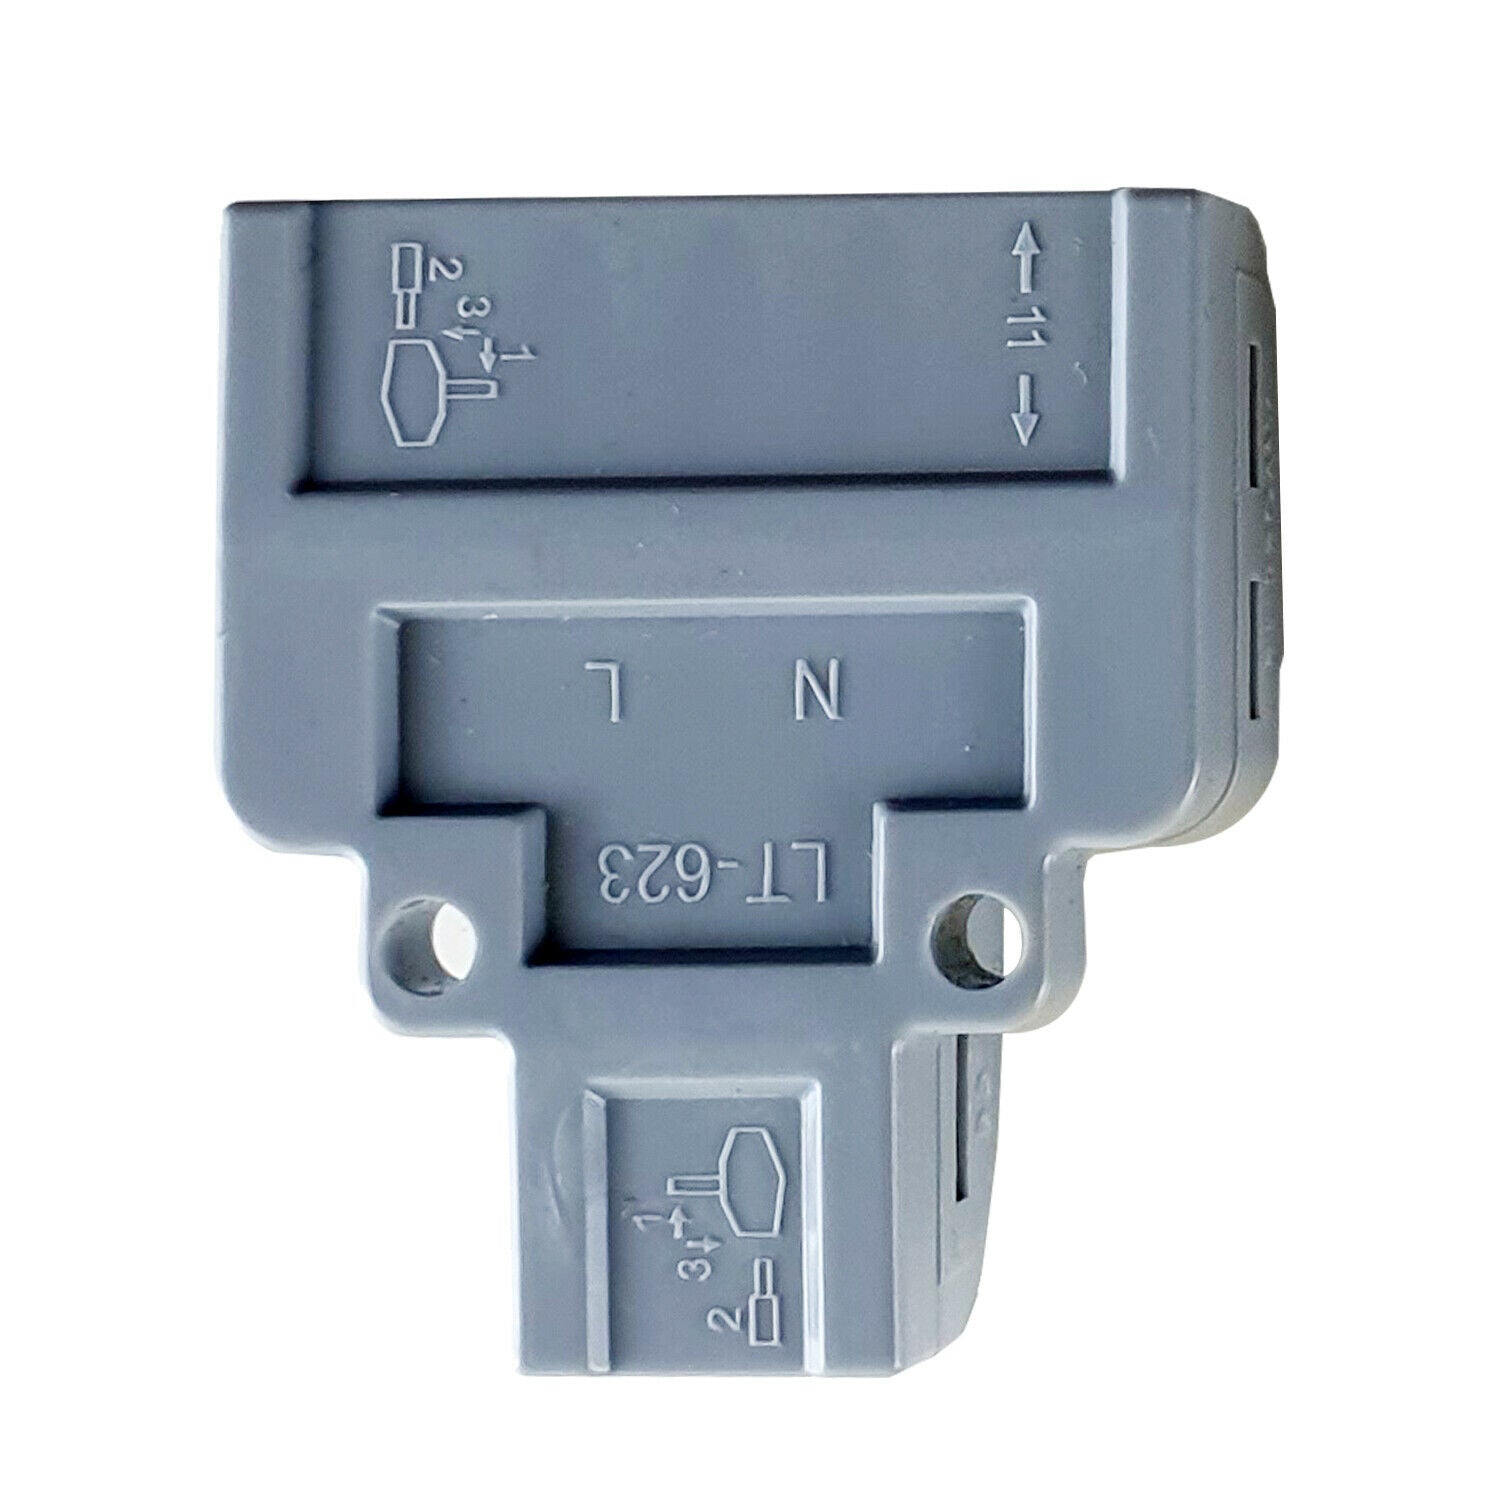 Connector 2to6 Out Wire Splitter Terminal Block Compact Wiring Blocks~1747 - LEDSone UK Ltd